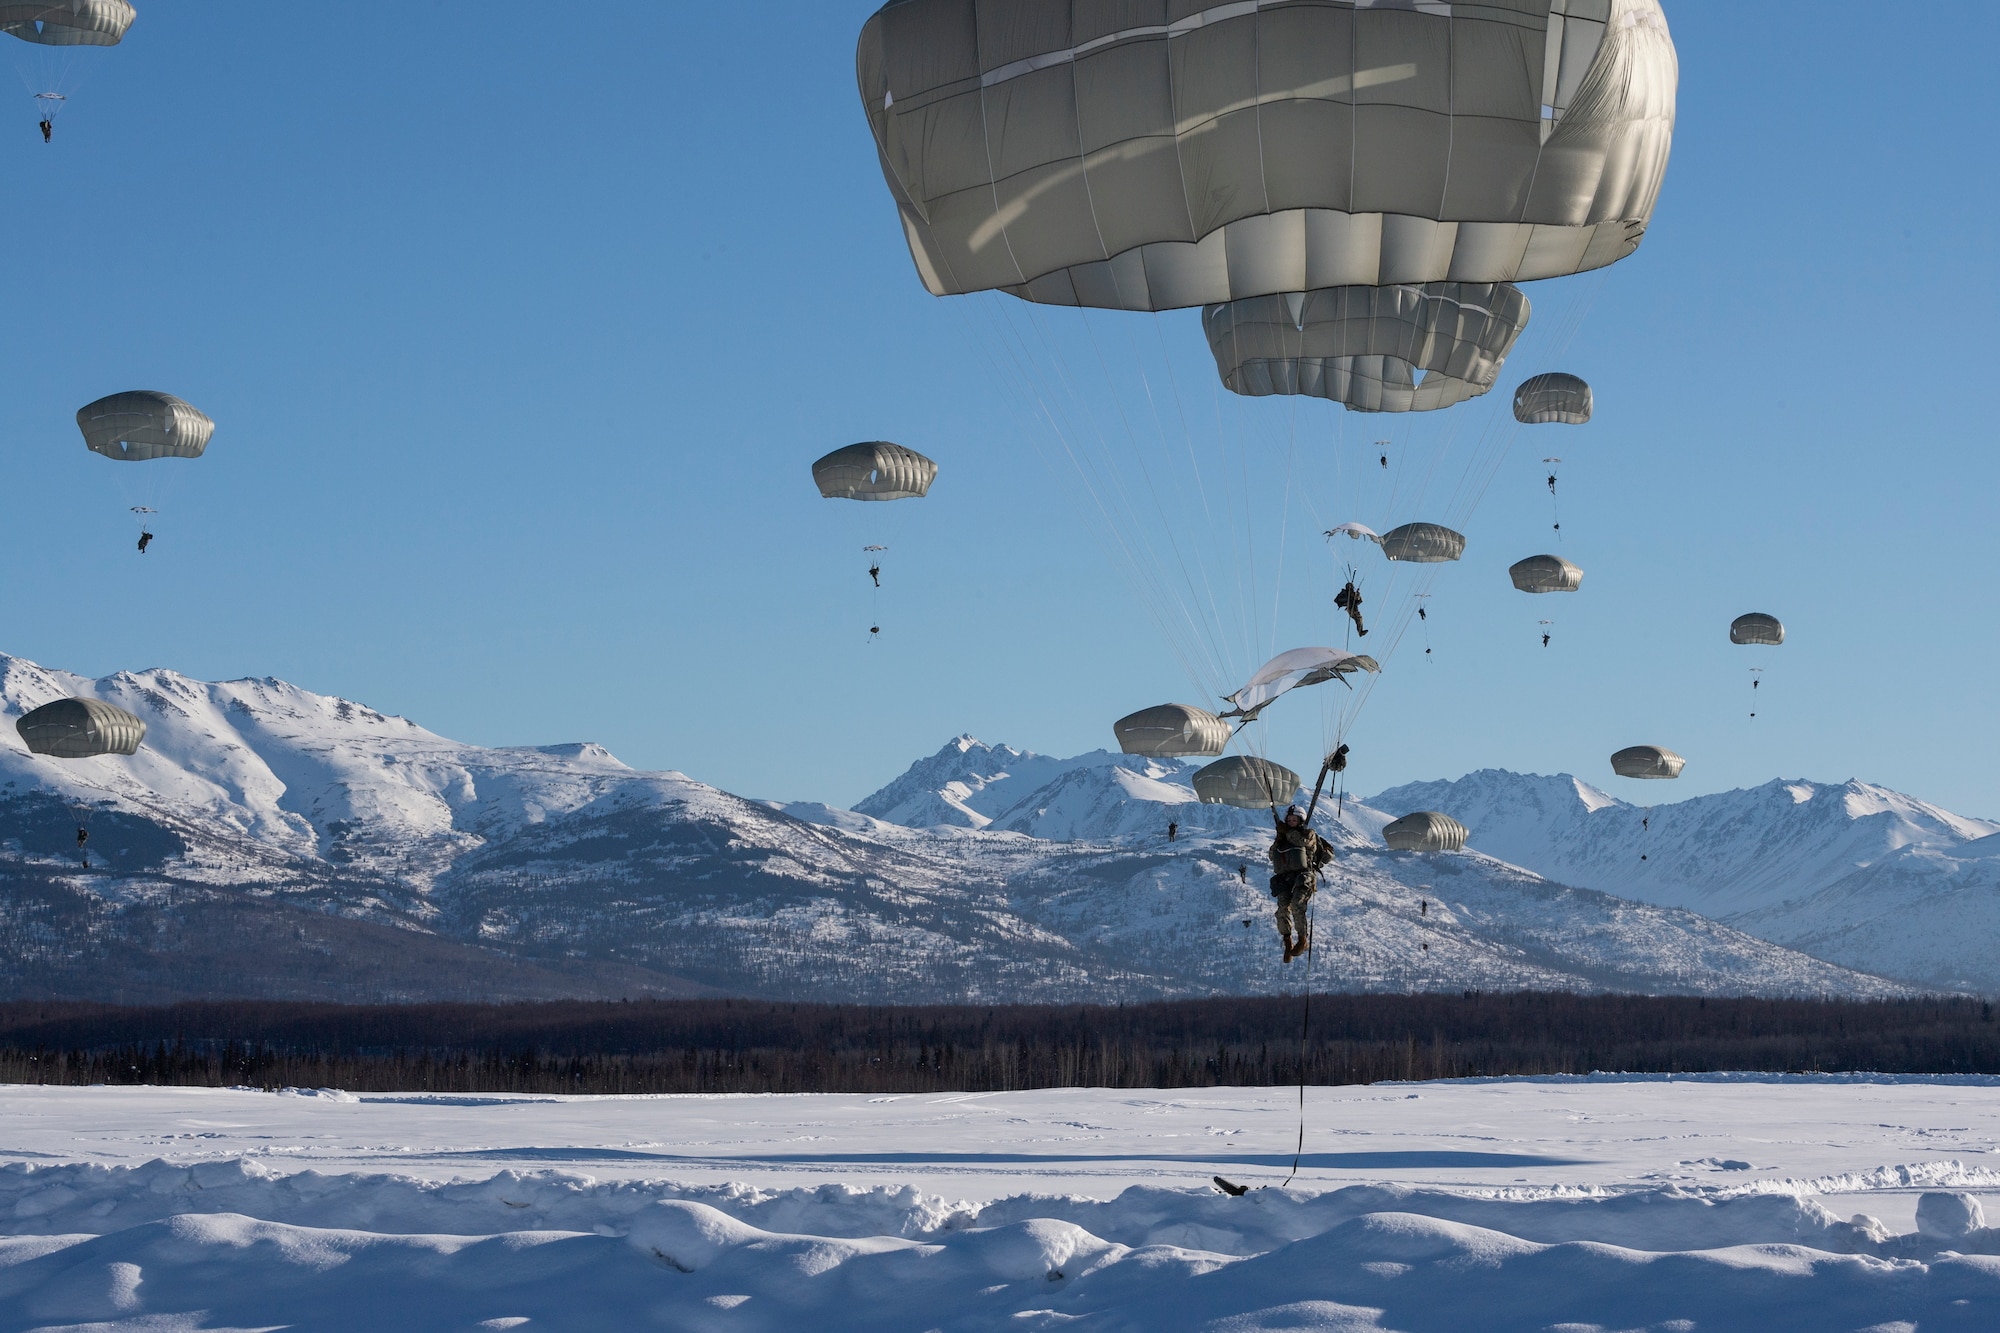 A photo of paratroopers descending upon a snowy drop zone